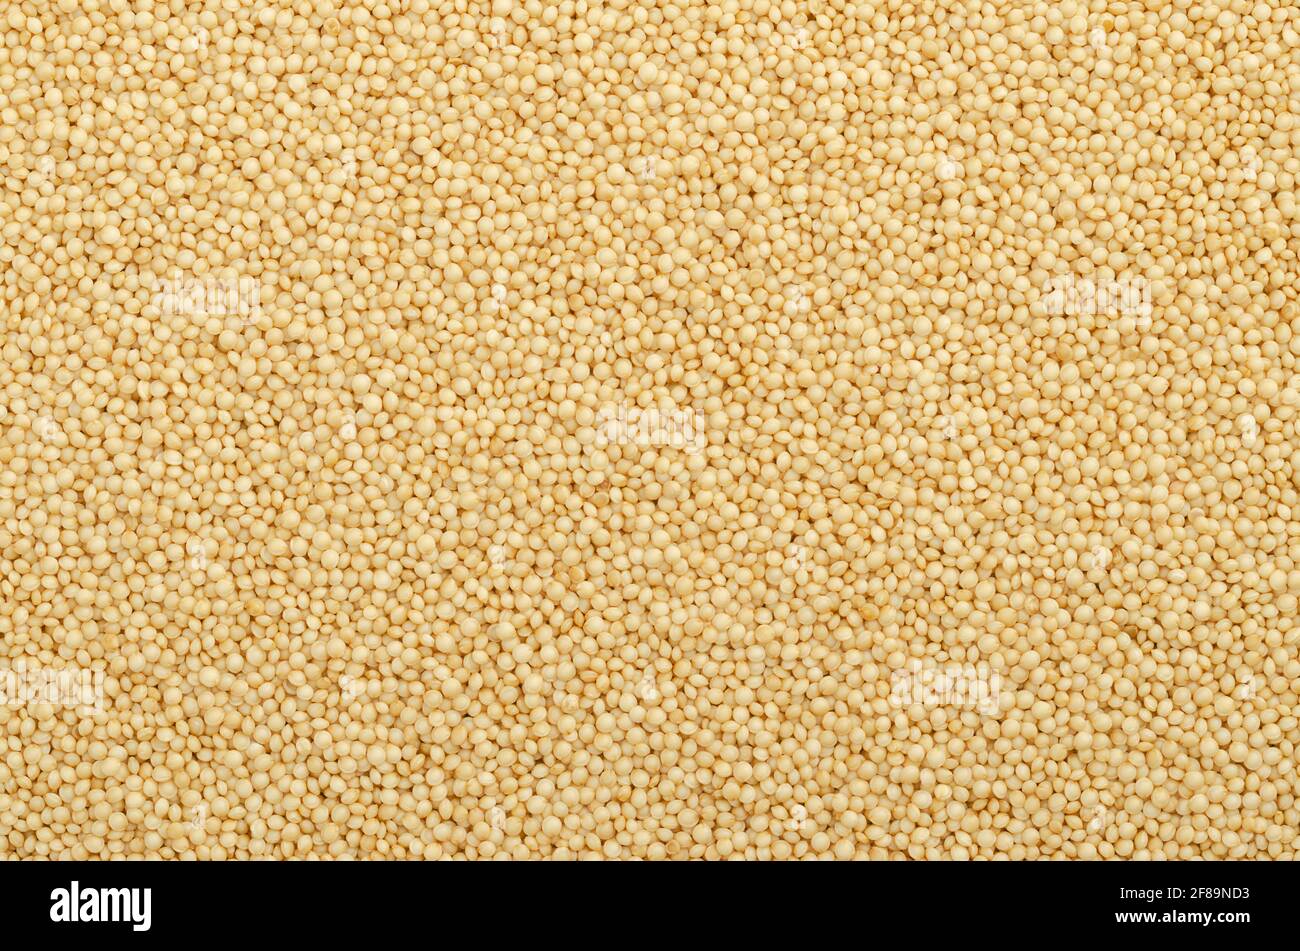 Amaranth grain surface and background. Tiny seeds of Amaranthus, a gluten free pseudocereal similar to quinoa, a staple food and source of protein. Stock Photo